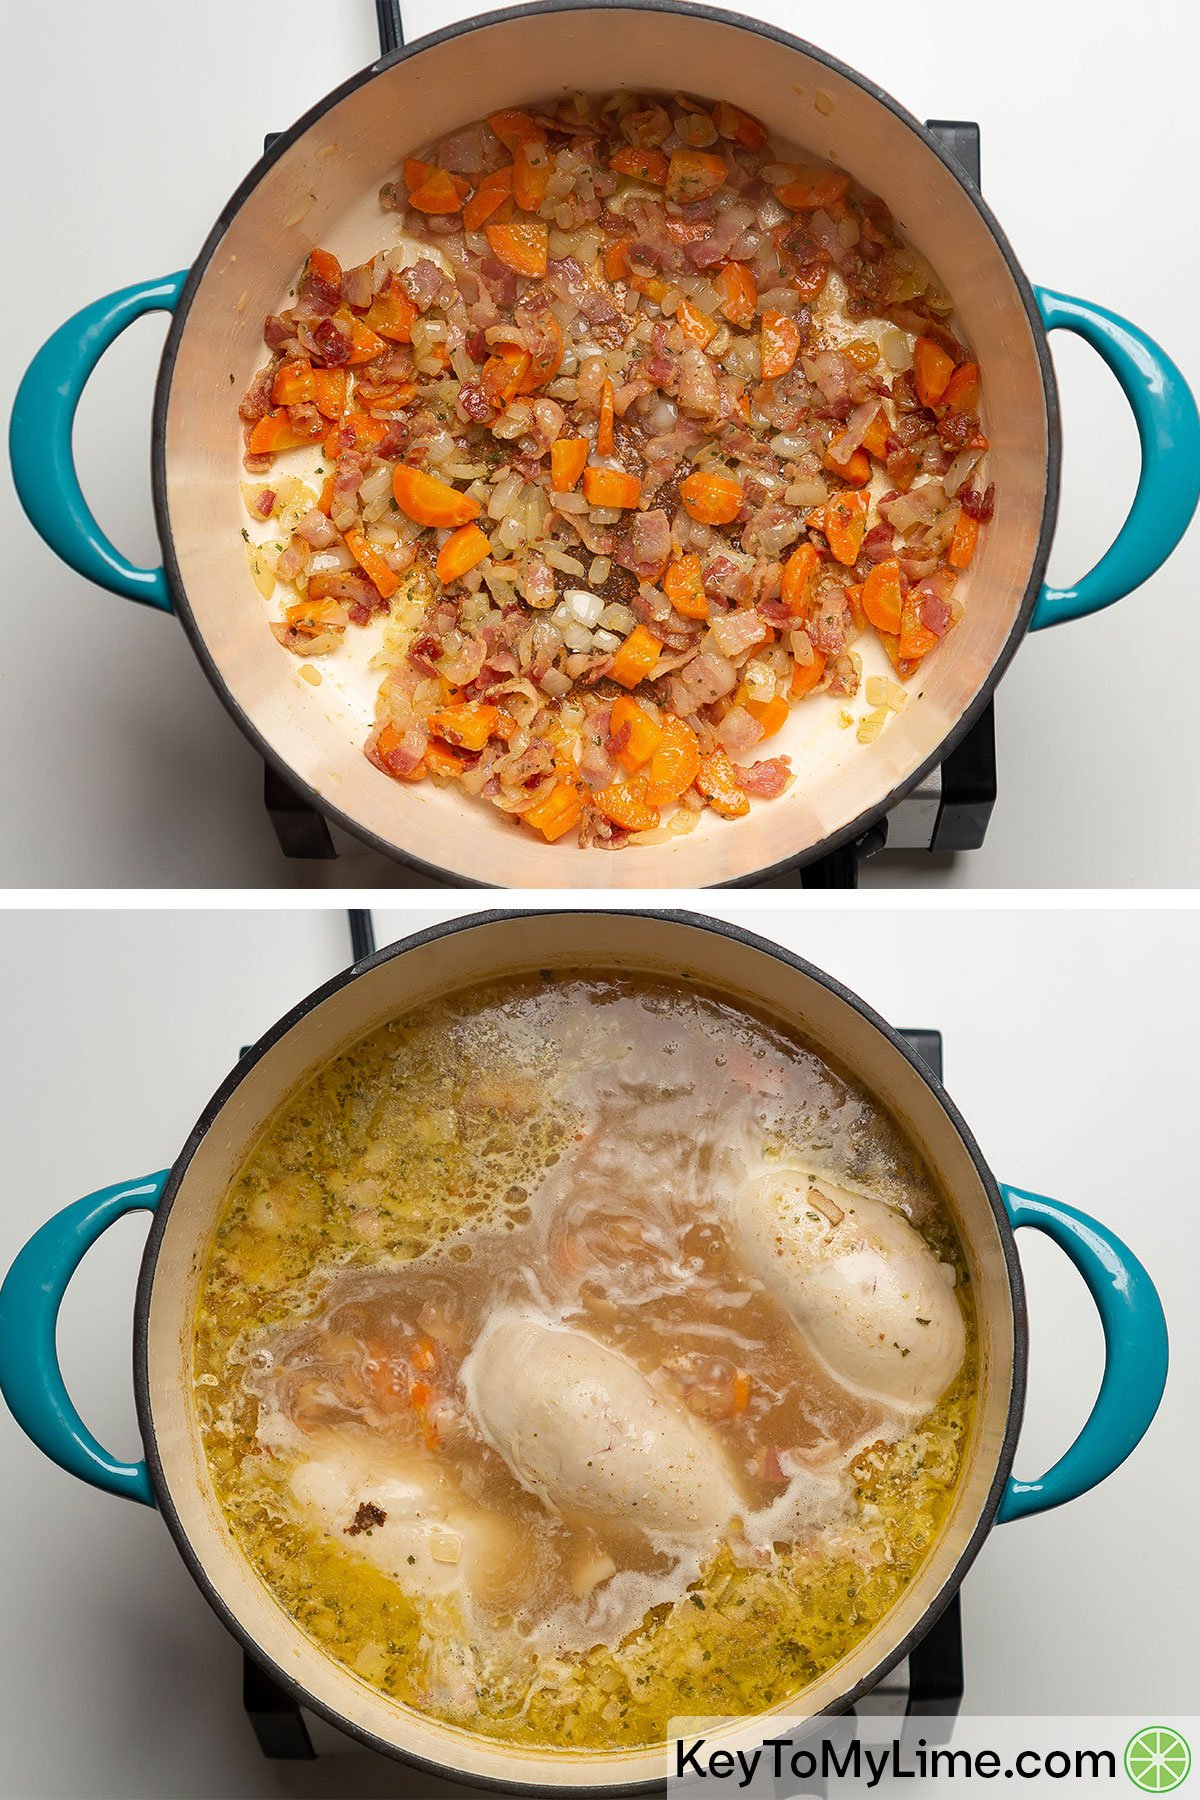 Adding ranch seasoning, chicken broth, and chicken breasts to a large pot.